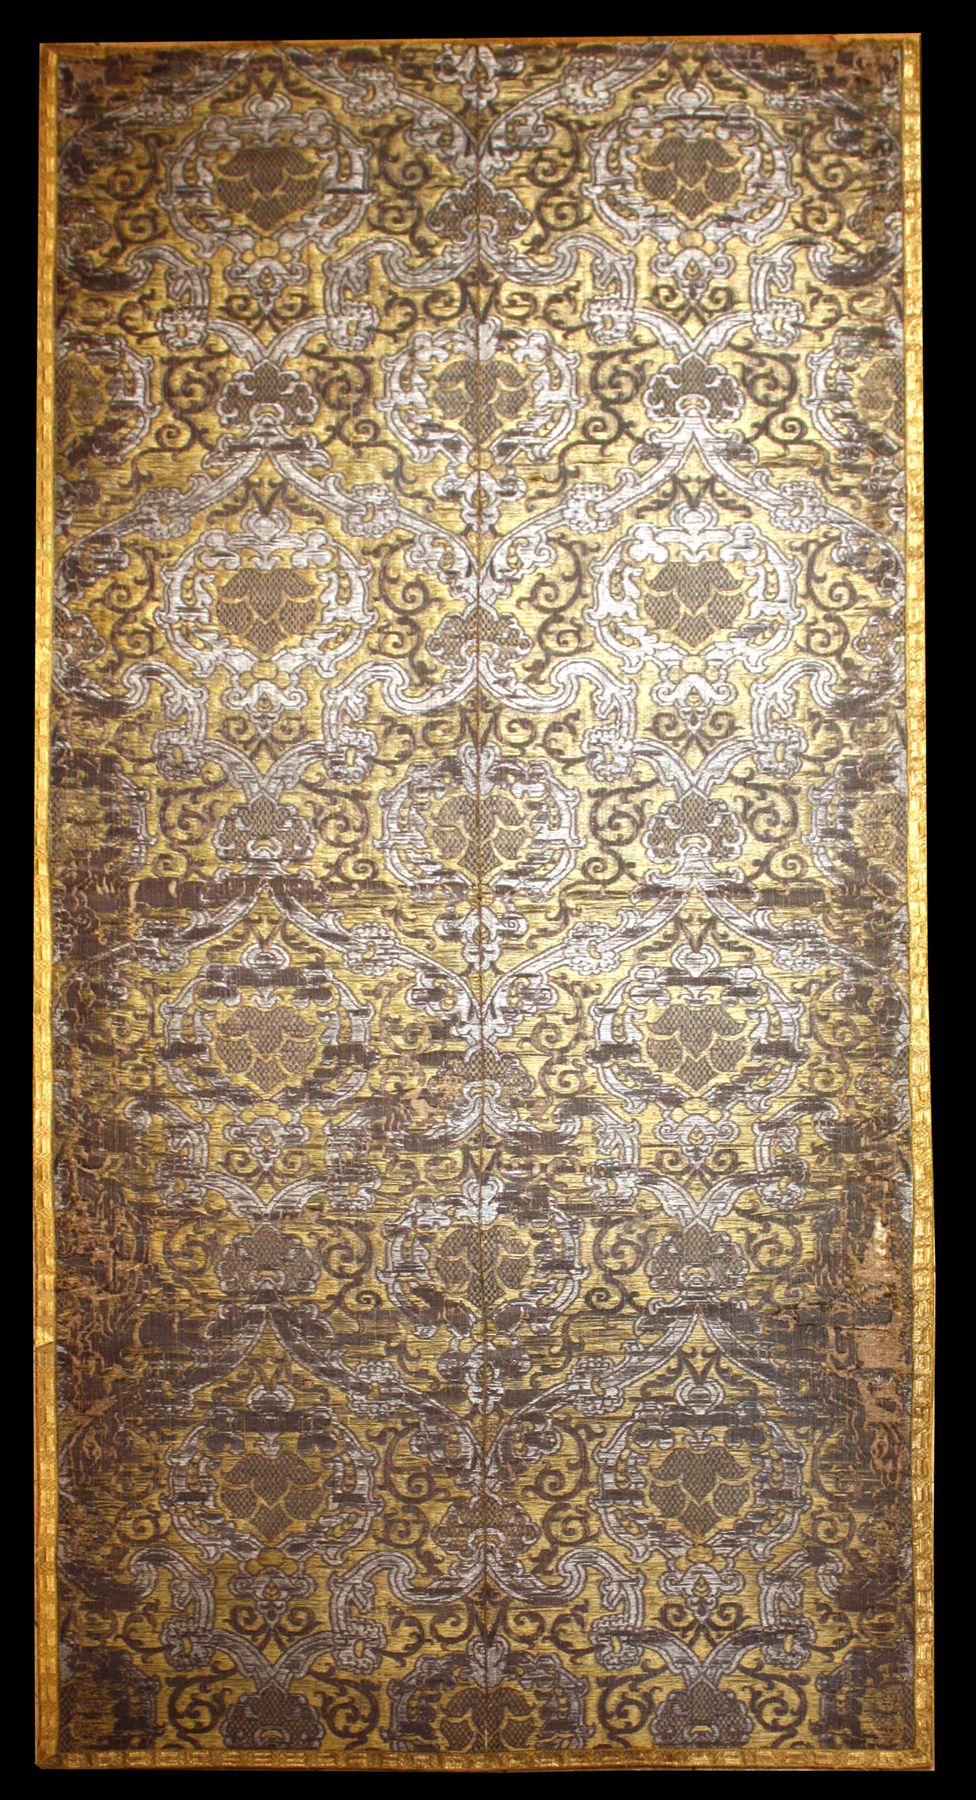 Italian Brocatelle, circa 1550, with a design of arabesques, entwining stems and vegetal ornament woven in silver metal thread and silk on a rich yellow silk ground. Joanna Booth, London